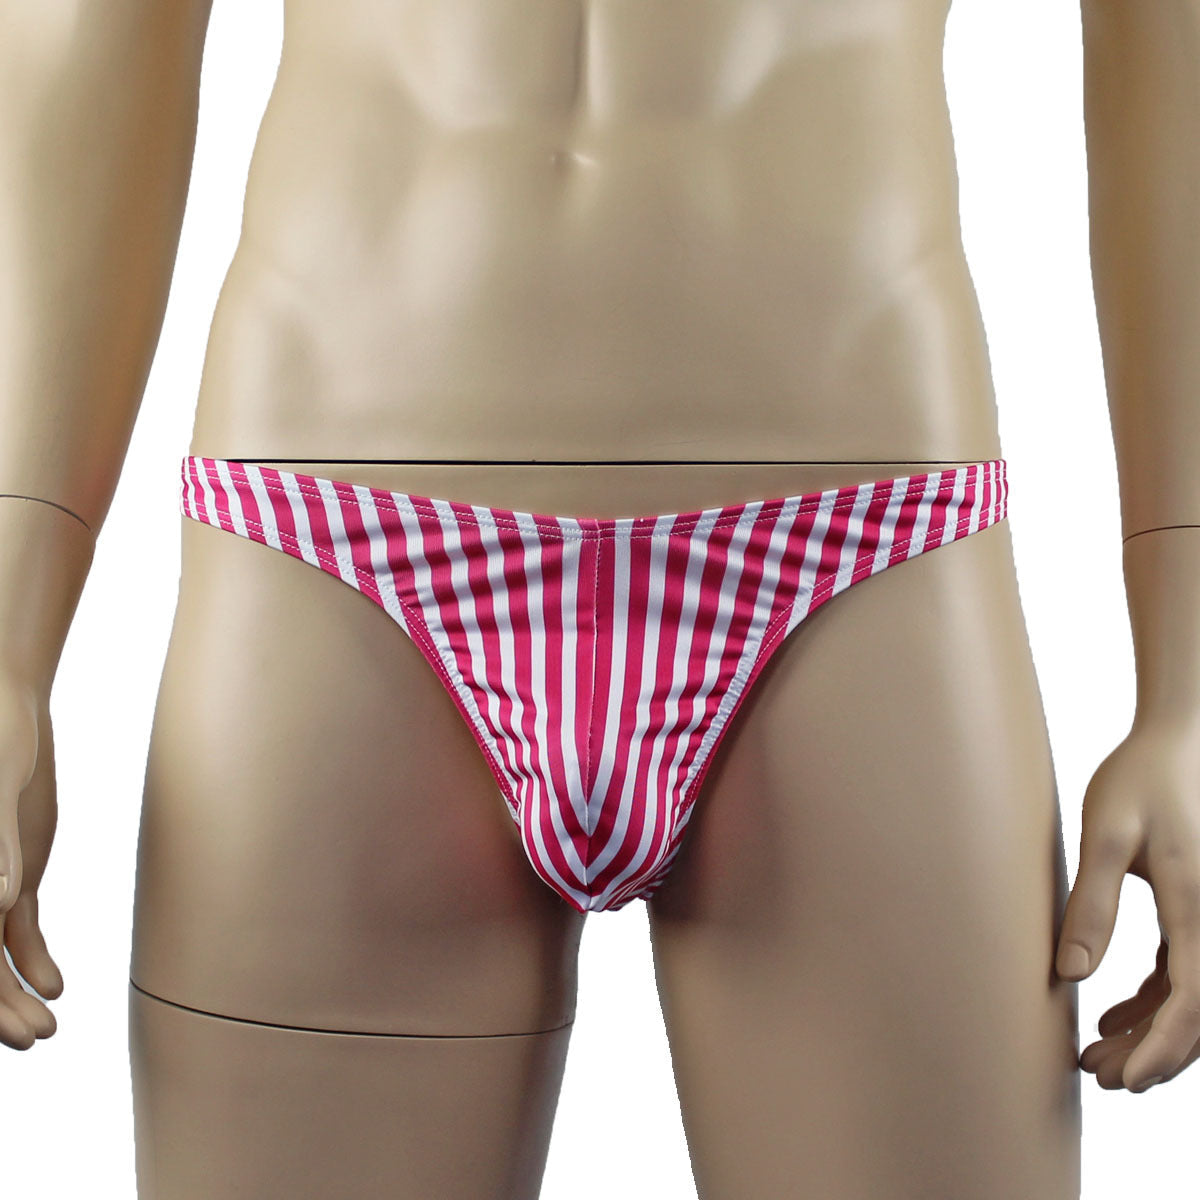 SALE - Candy Stripes Christmas Mens G string Thong Xmas Underwear